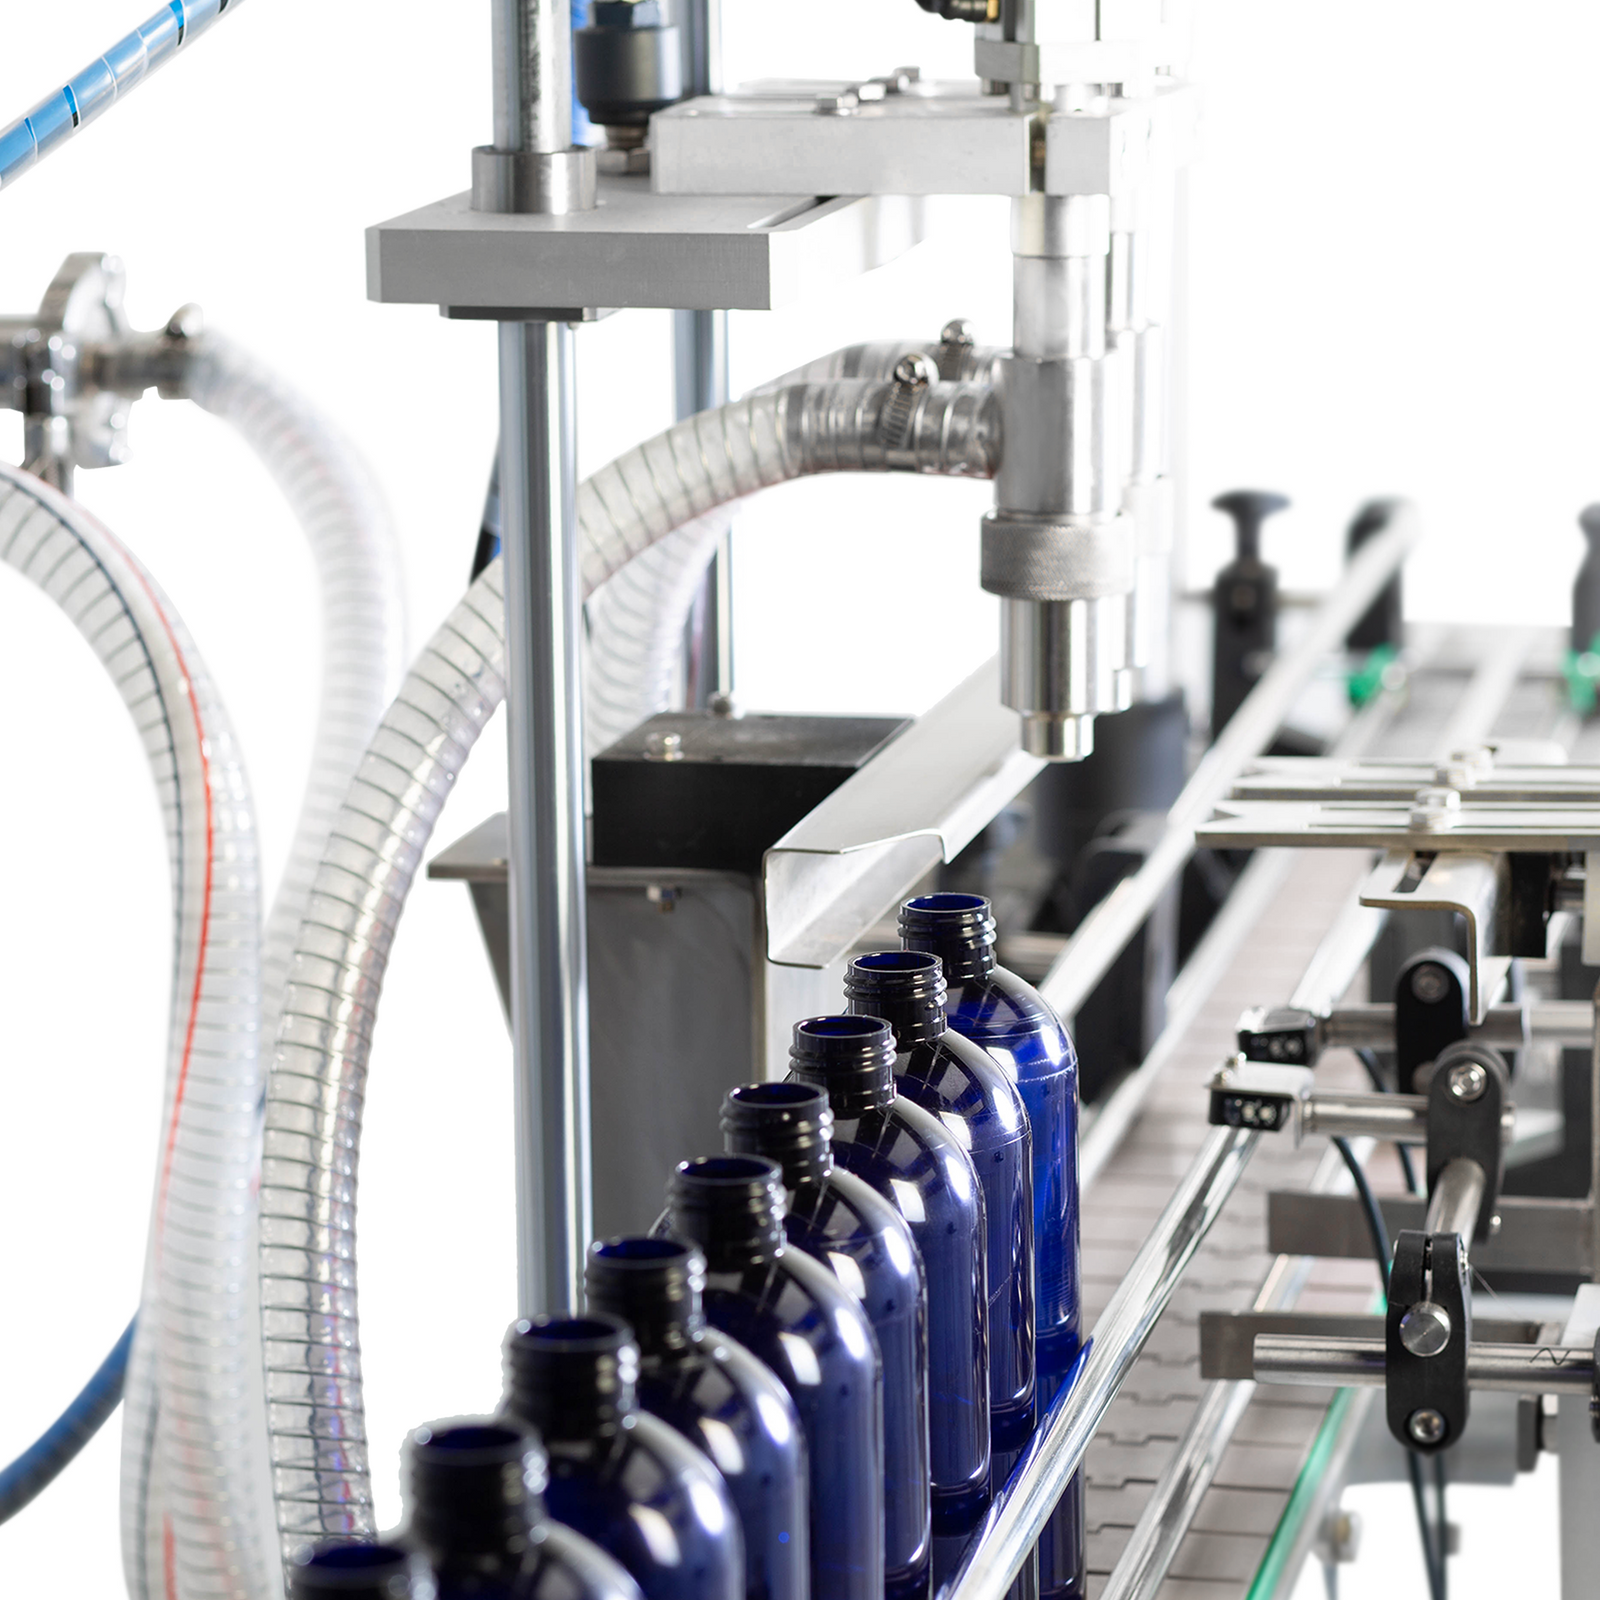 Closeup of the two heads of the paste filling system about to dispense high viscosity product into a line of 1000ml blue bottles